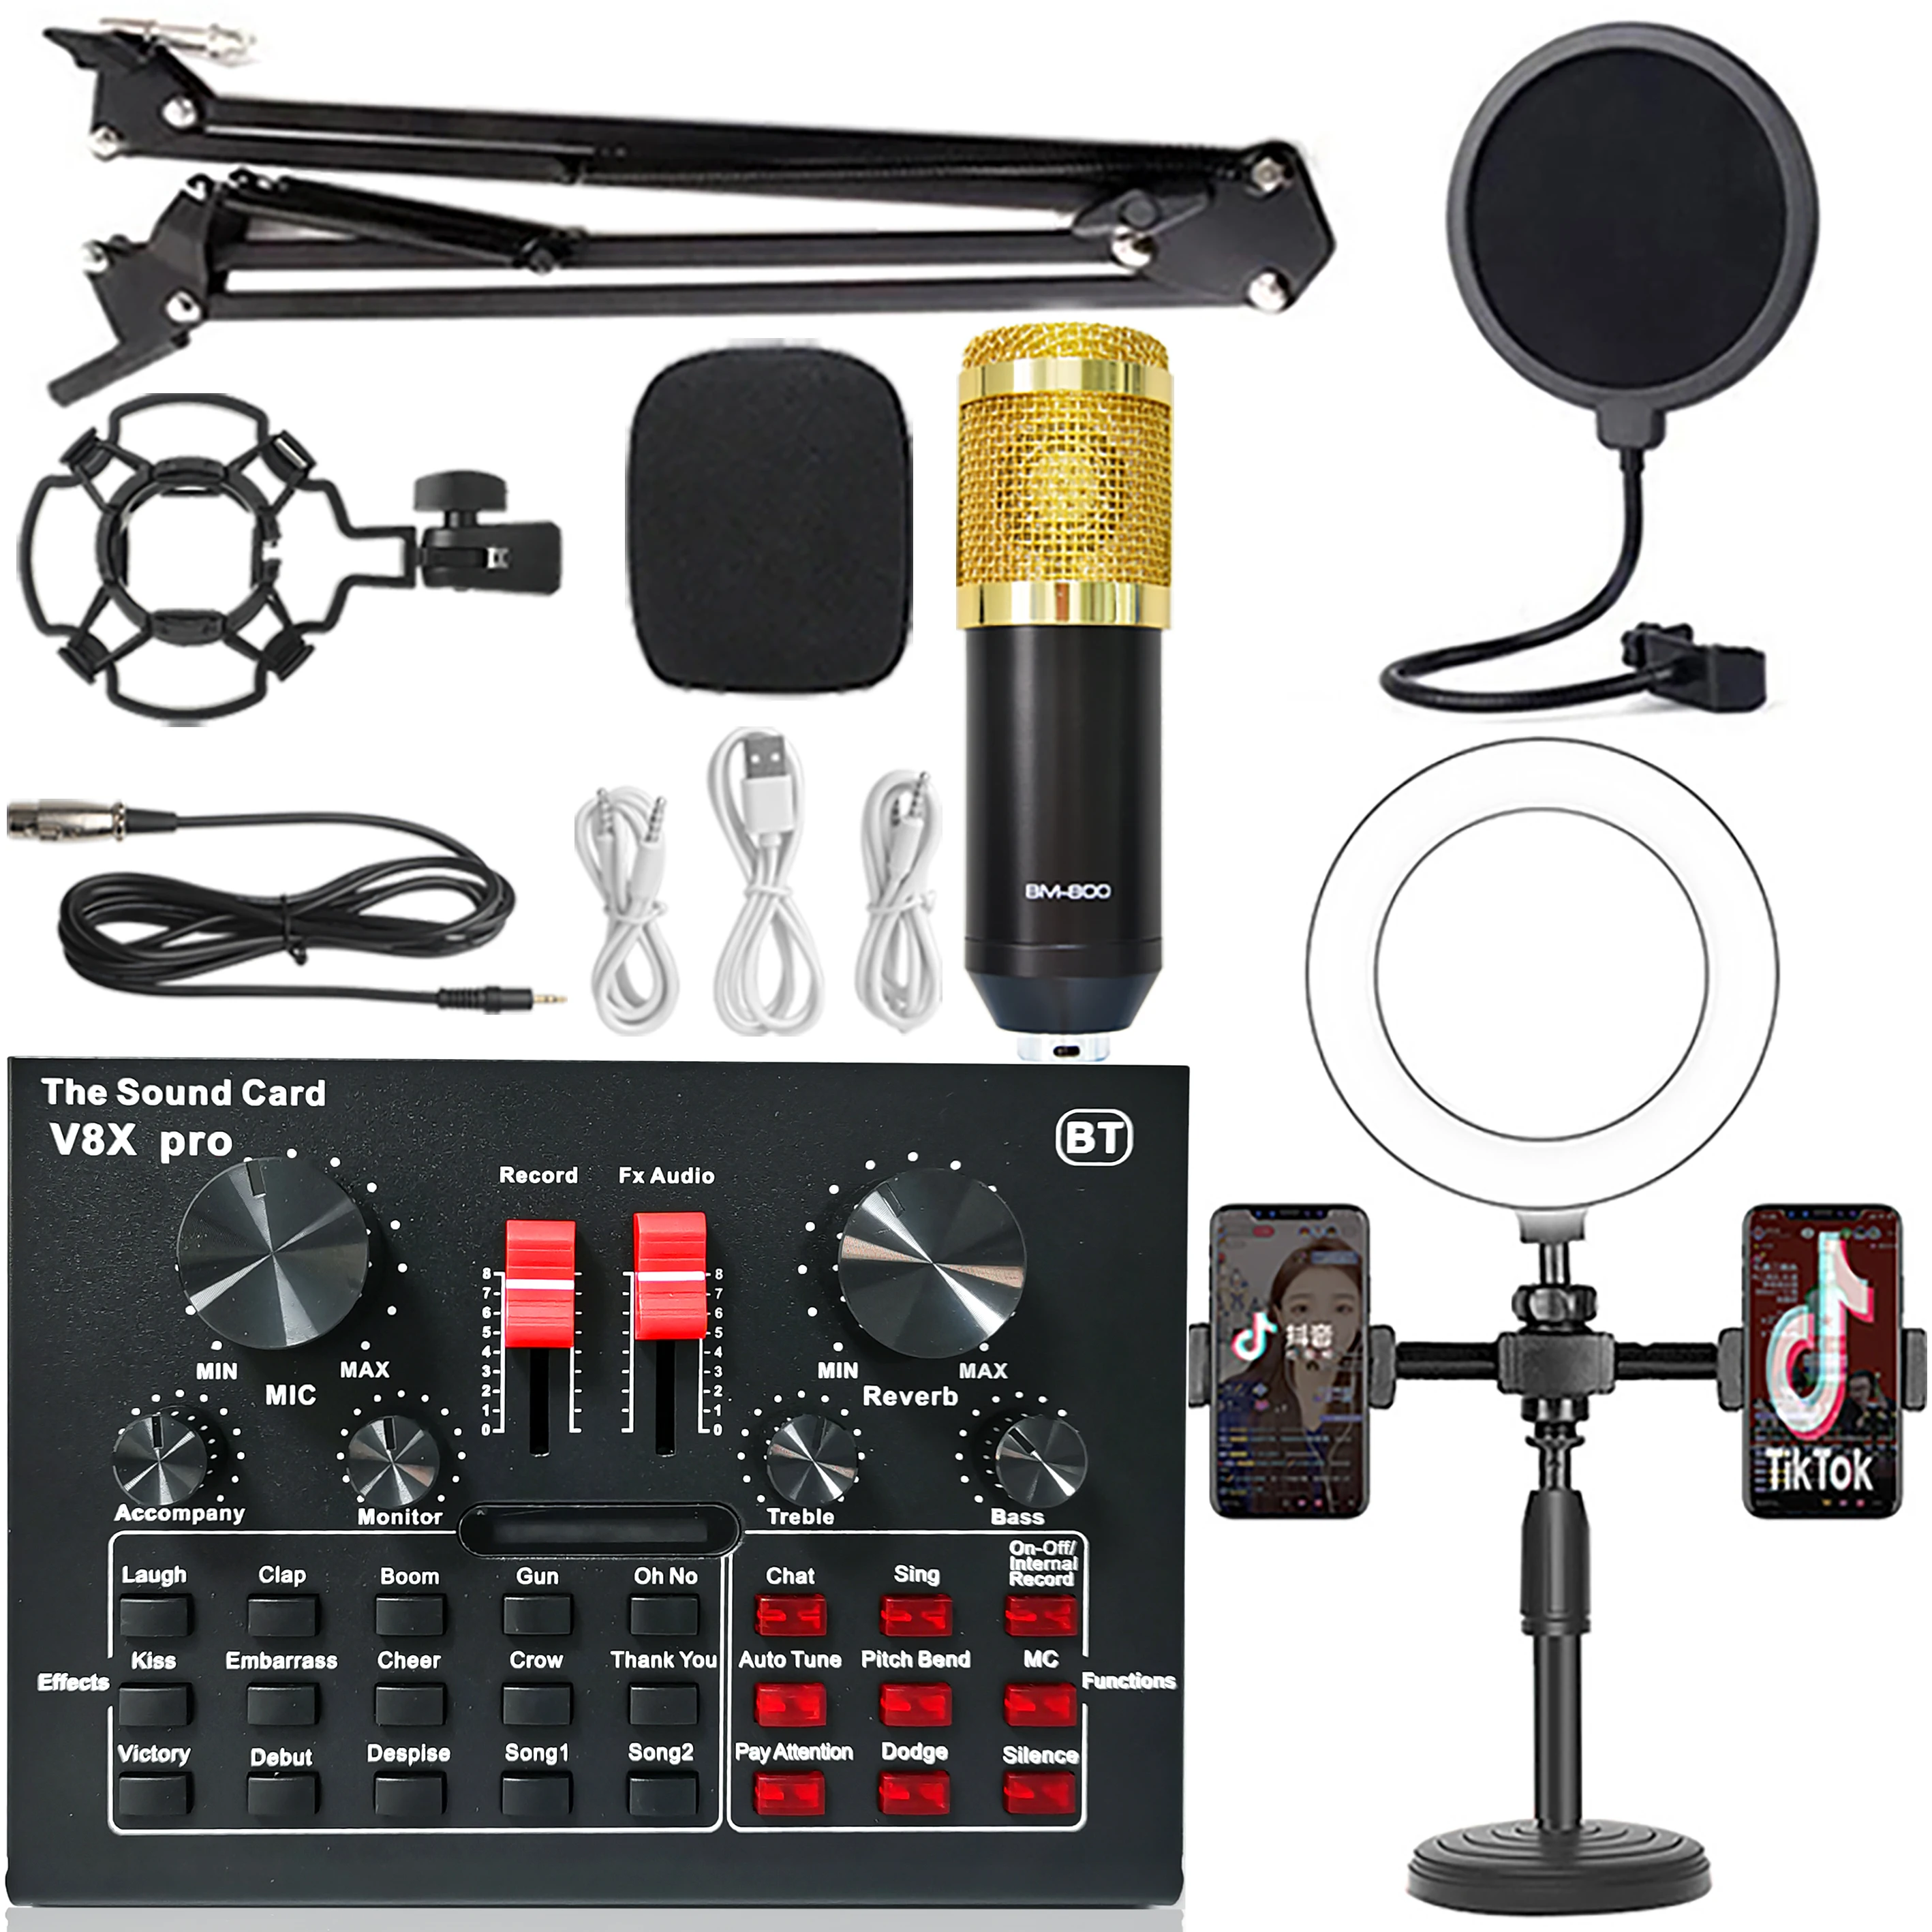 

V8X Pro Sound Card Studio Mixer Singing Noise Reduction Portable Microphone Voice BM800 Live Broadcast for Phone Computer Record